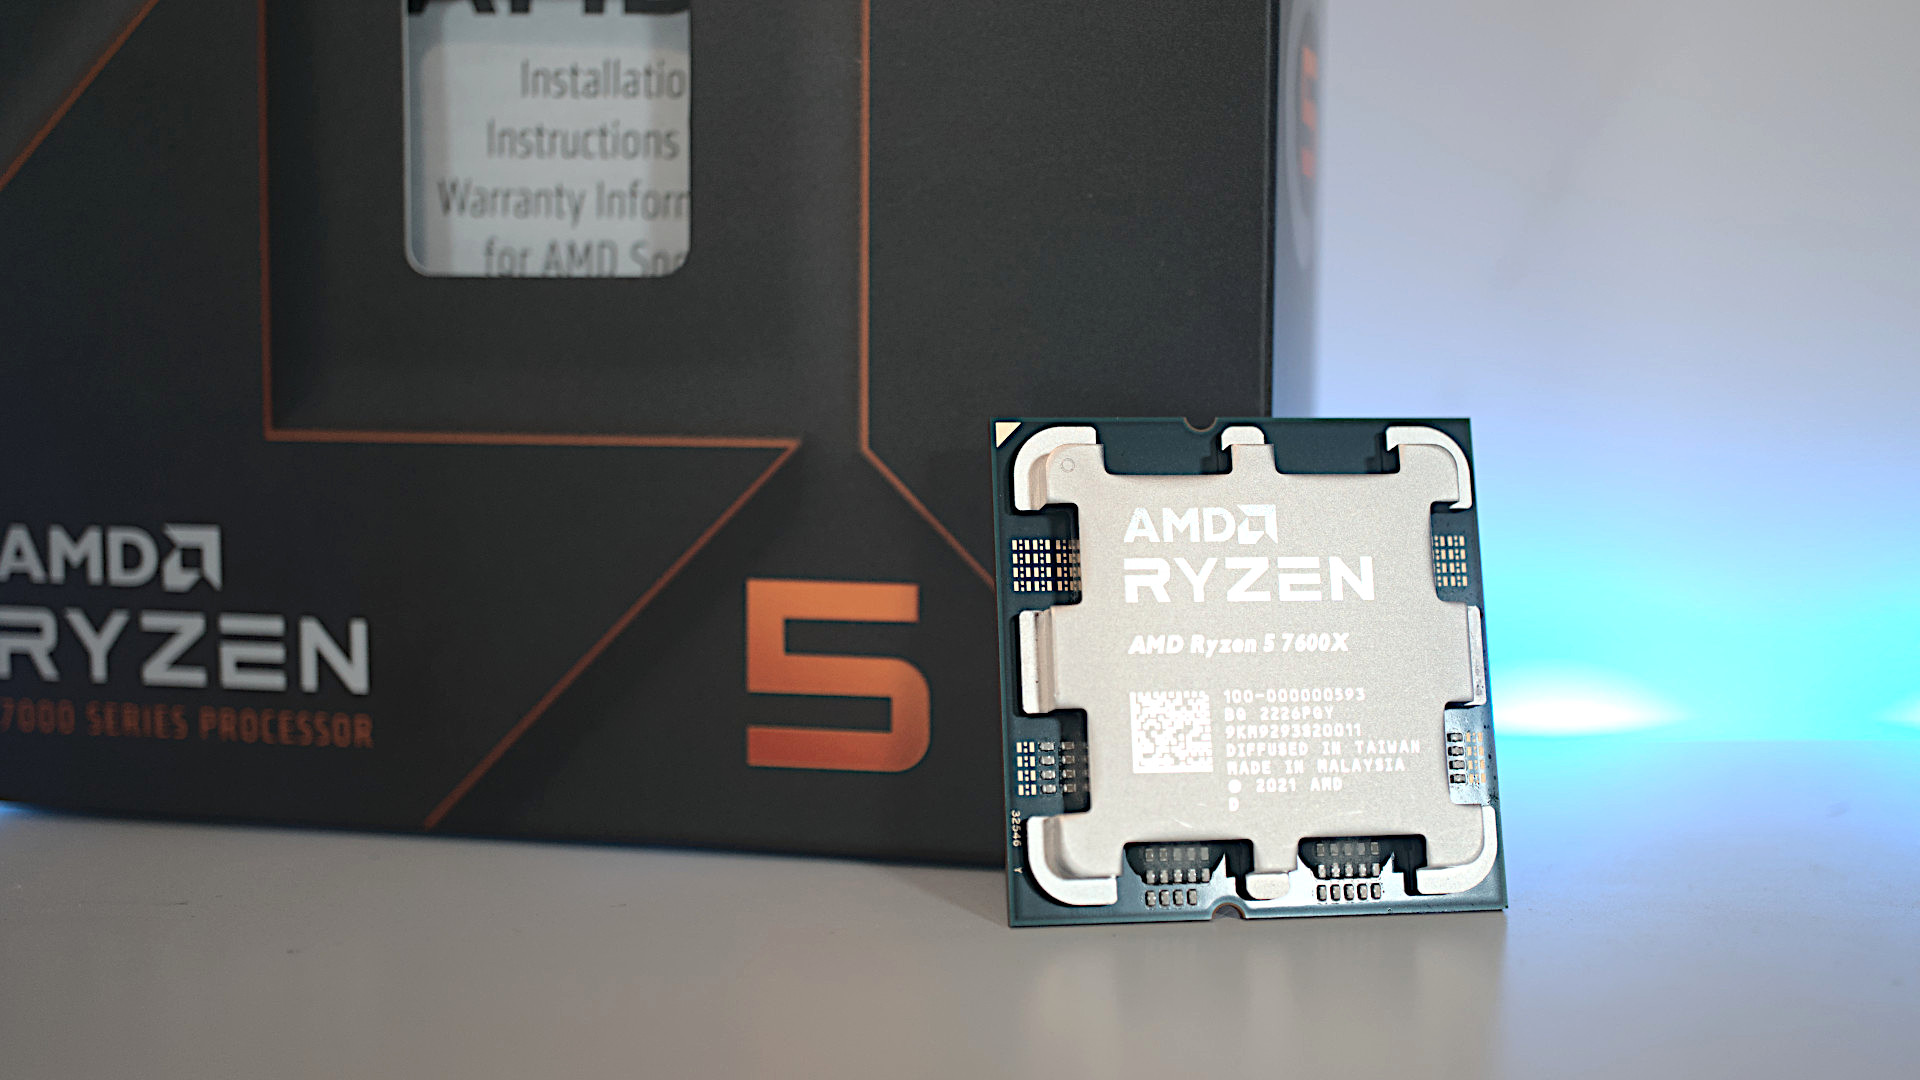 AMD Ryzen 5 7600X review: This entry-level AMD CPU is a 6-core